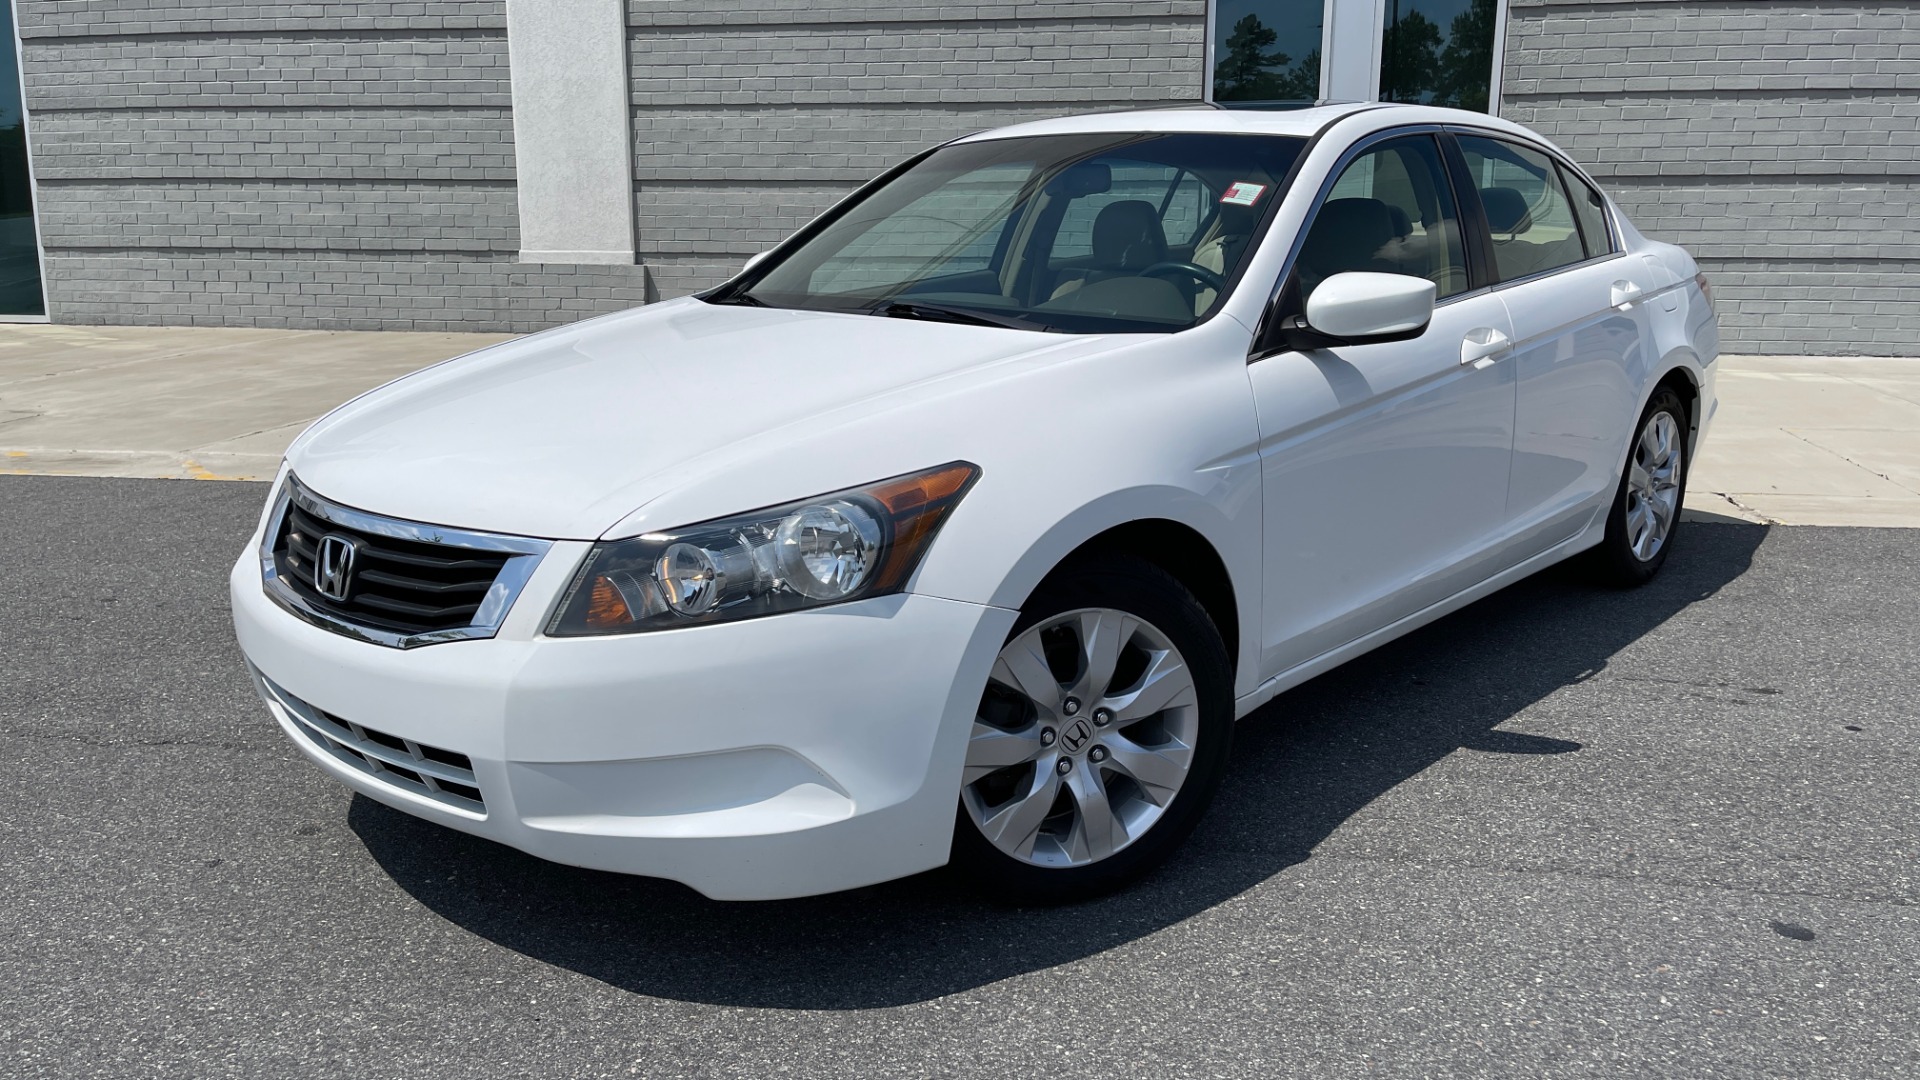 Used 2009 Honda ACCORD EX-L 4DR / 2.4L / AUTO / SUNROOF / ANC / DUAL-ZONE AUTO A/C for sale Sold at Formula Imports in Charlotte NC 28227 1